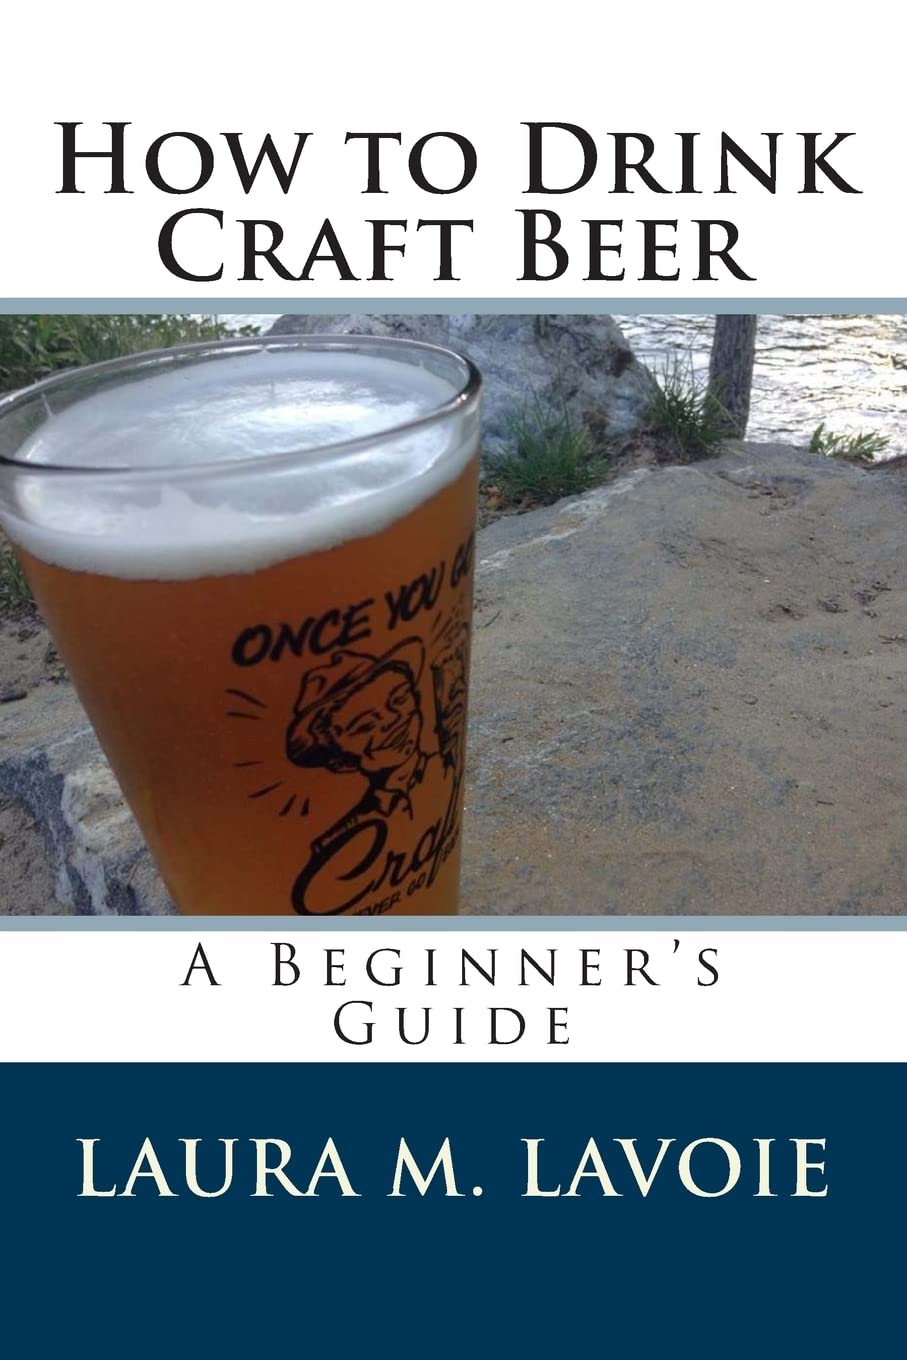 How To Drink Craft Beer: A Beginner's Guide 